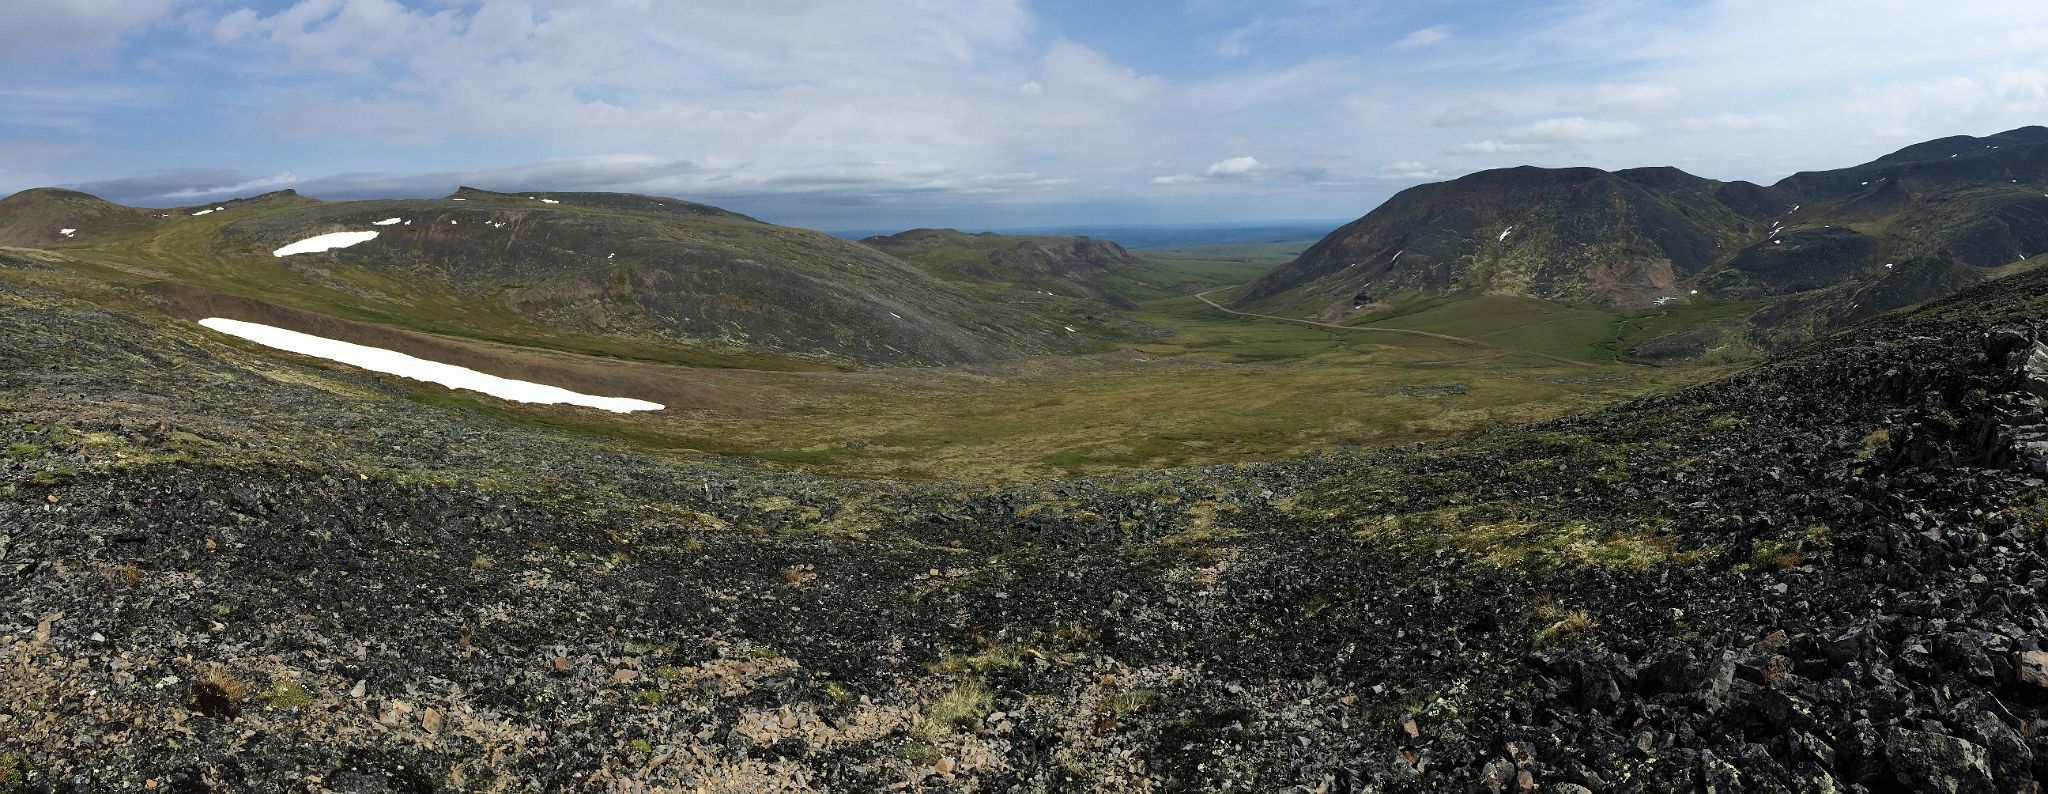 13C Panoramic View Of the Richardson Mountains From Communication Tower On Side Road Off The Dempster Highway On Day Tour From Inuvik To Arctic Circle